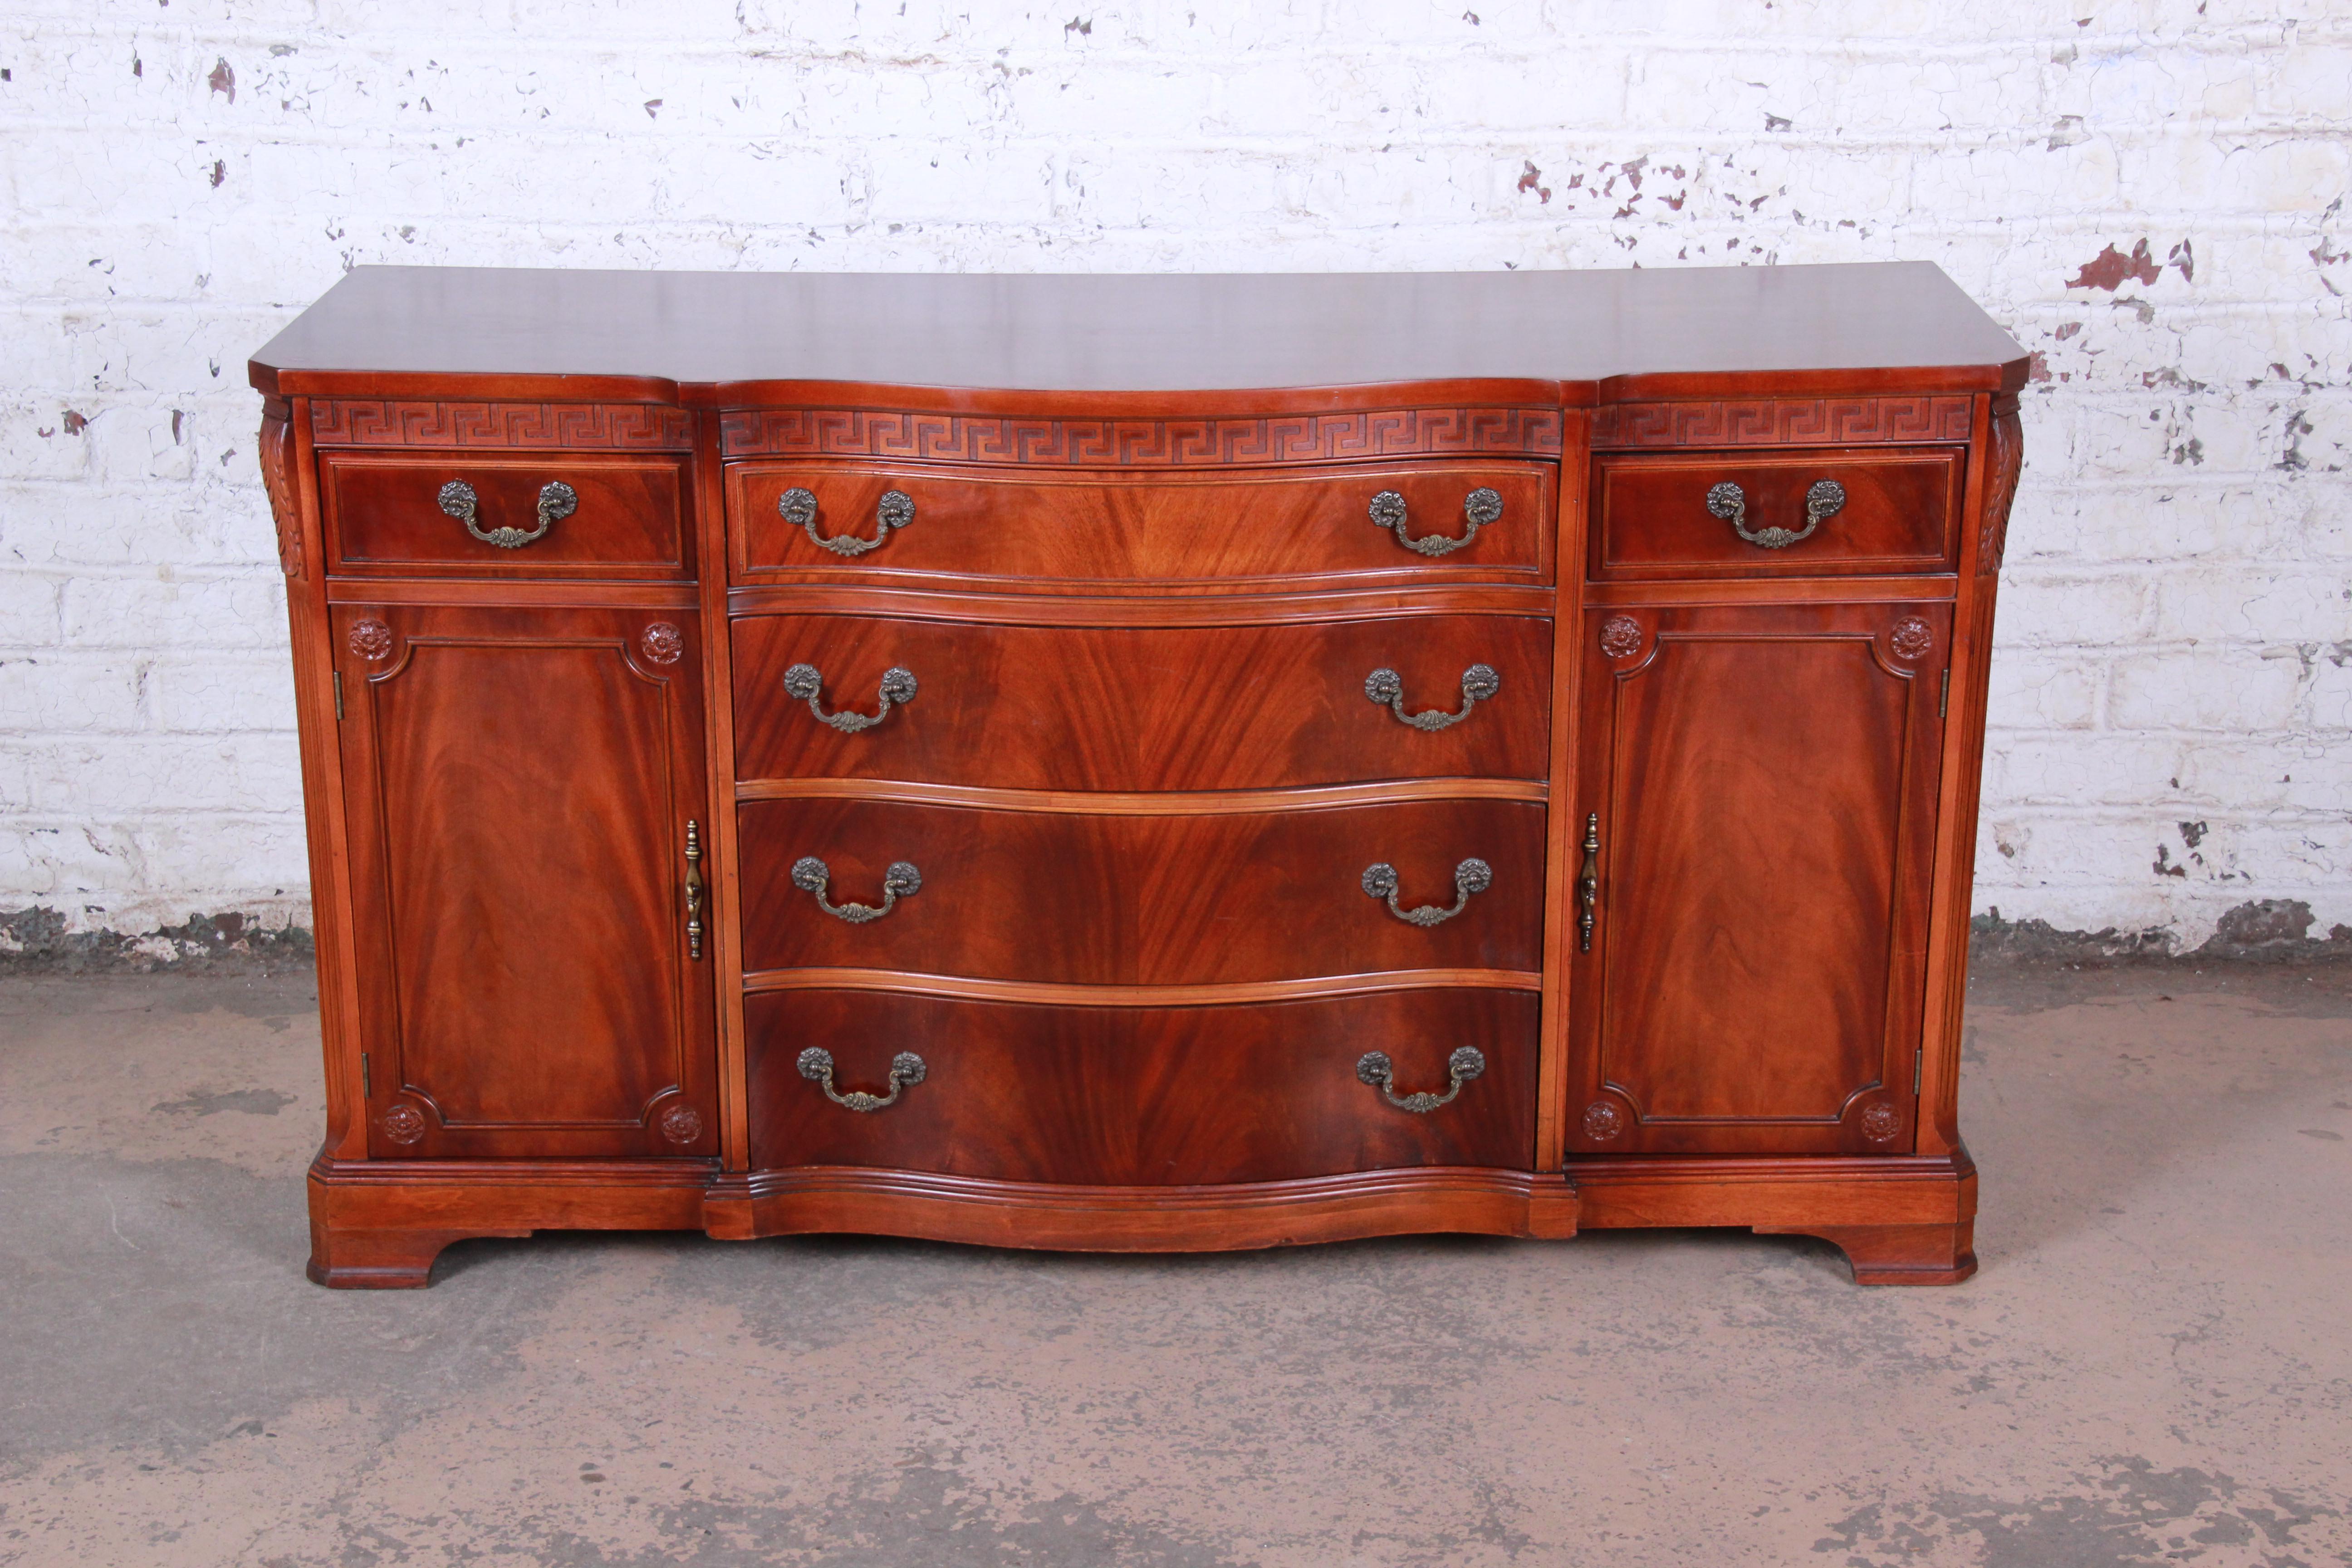 A stunning flame mahogany sideboard buffet by Bernhardt. The sideboard features gorgeous flame mahogany wood grain and nice carved details. It offer ample storage, with six dovetailed drawers and two storage cabinets with an adjustable shelf in